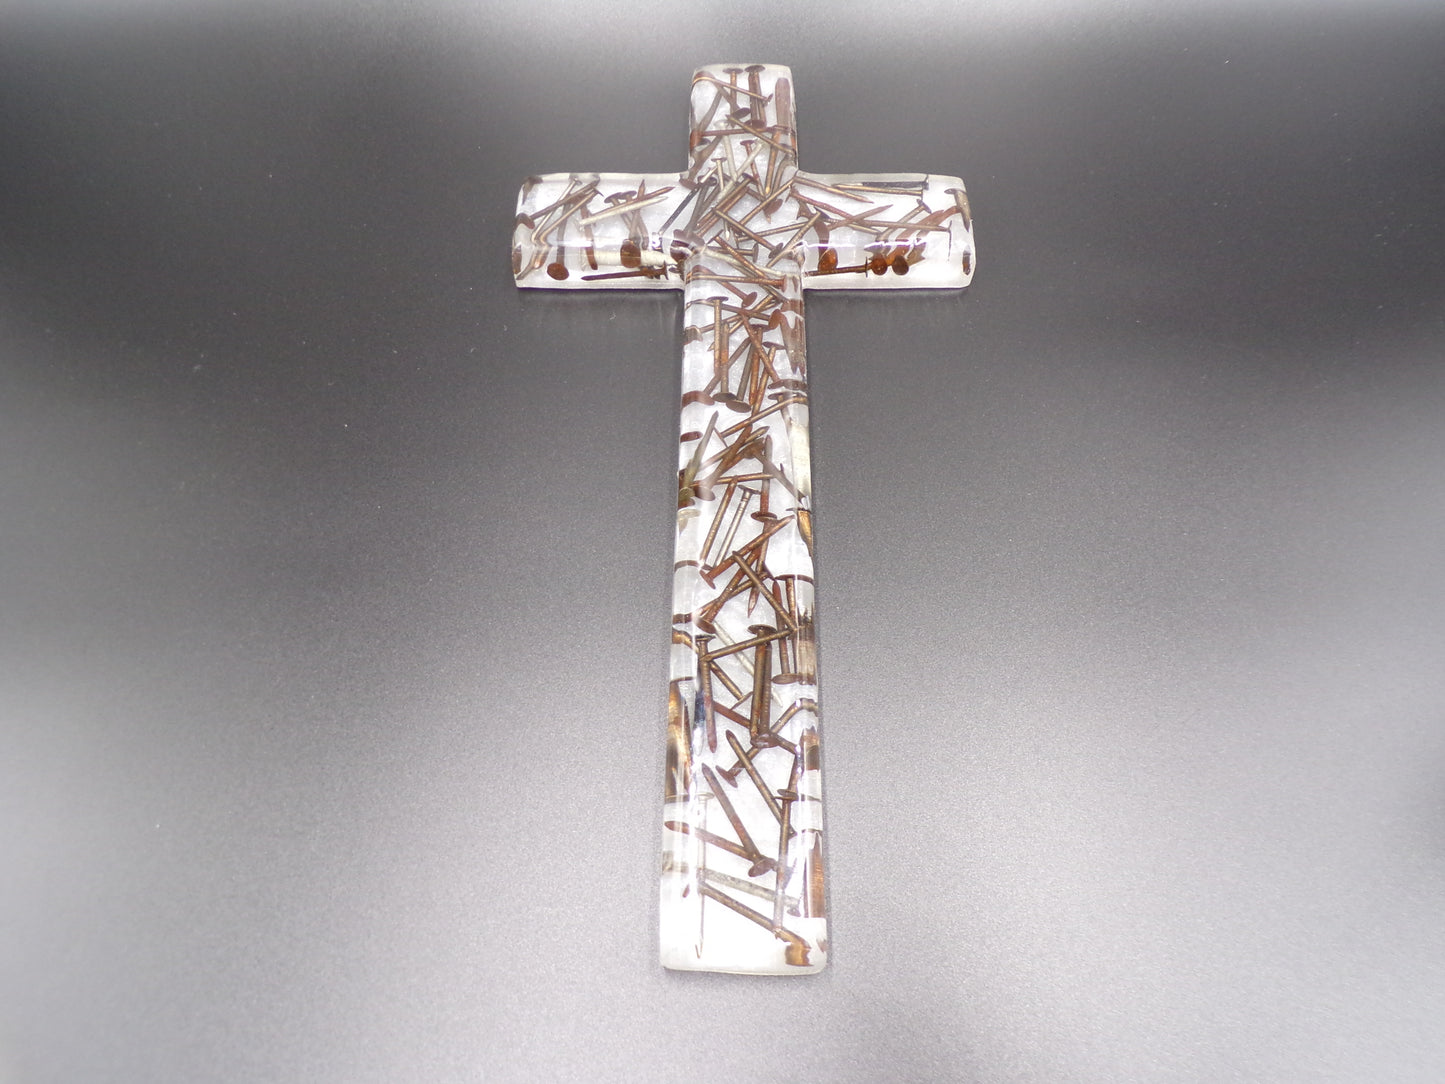 Nail of Devotion Cross: Solid Epoxy Resin with Embedded Nails Give the Gift of God's Love